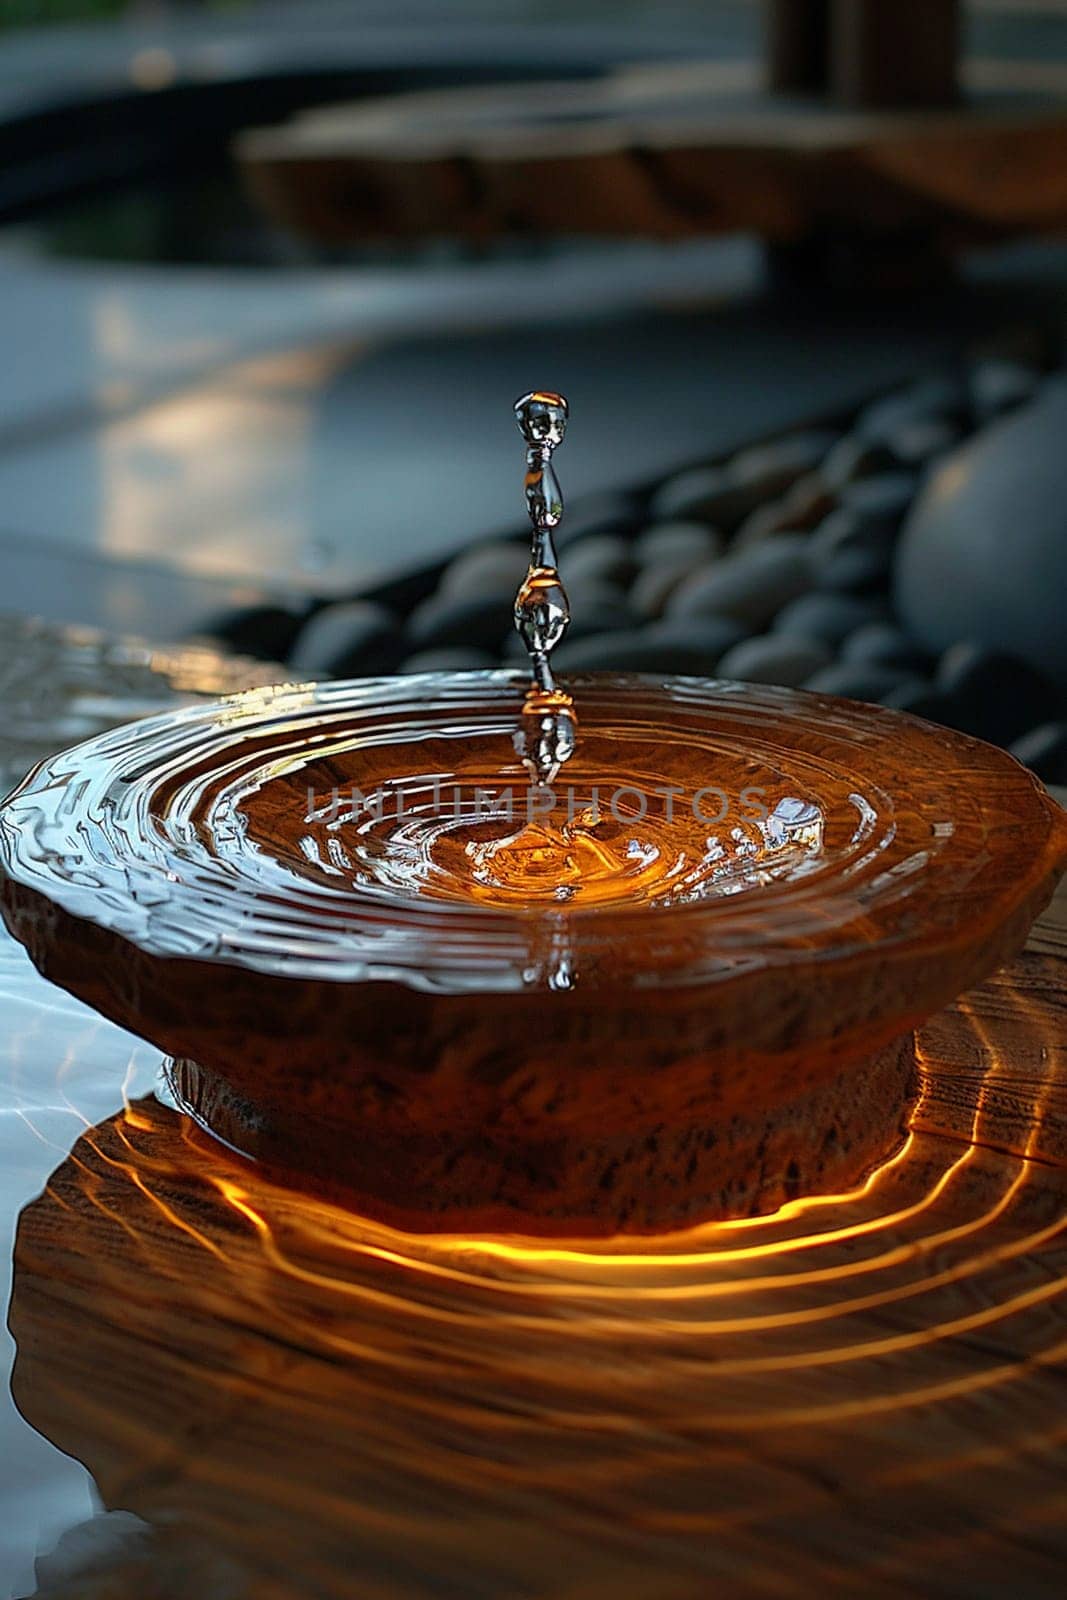 Holy Water Font with Gentle Ripples Reflecting Light, The movement of water creates an aura of purification and blessing.